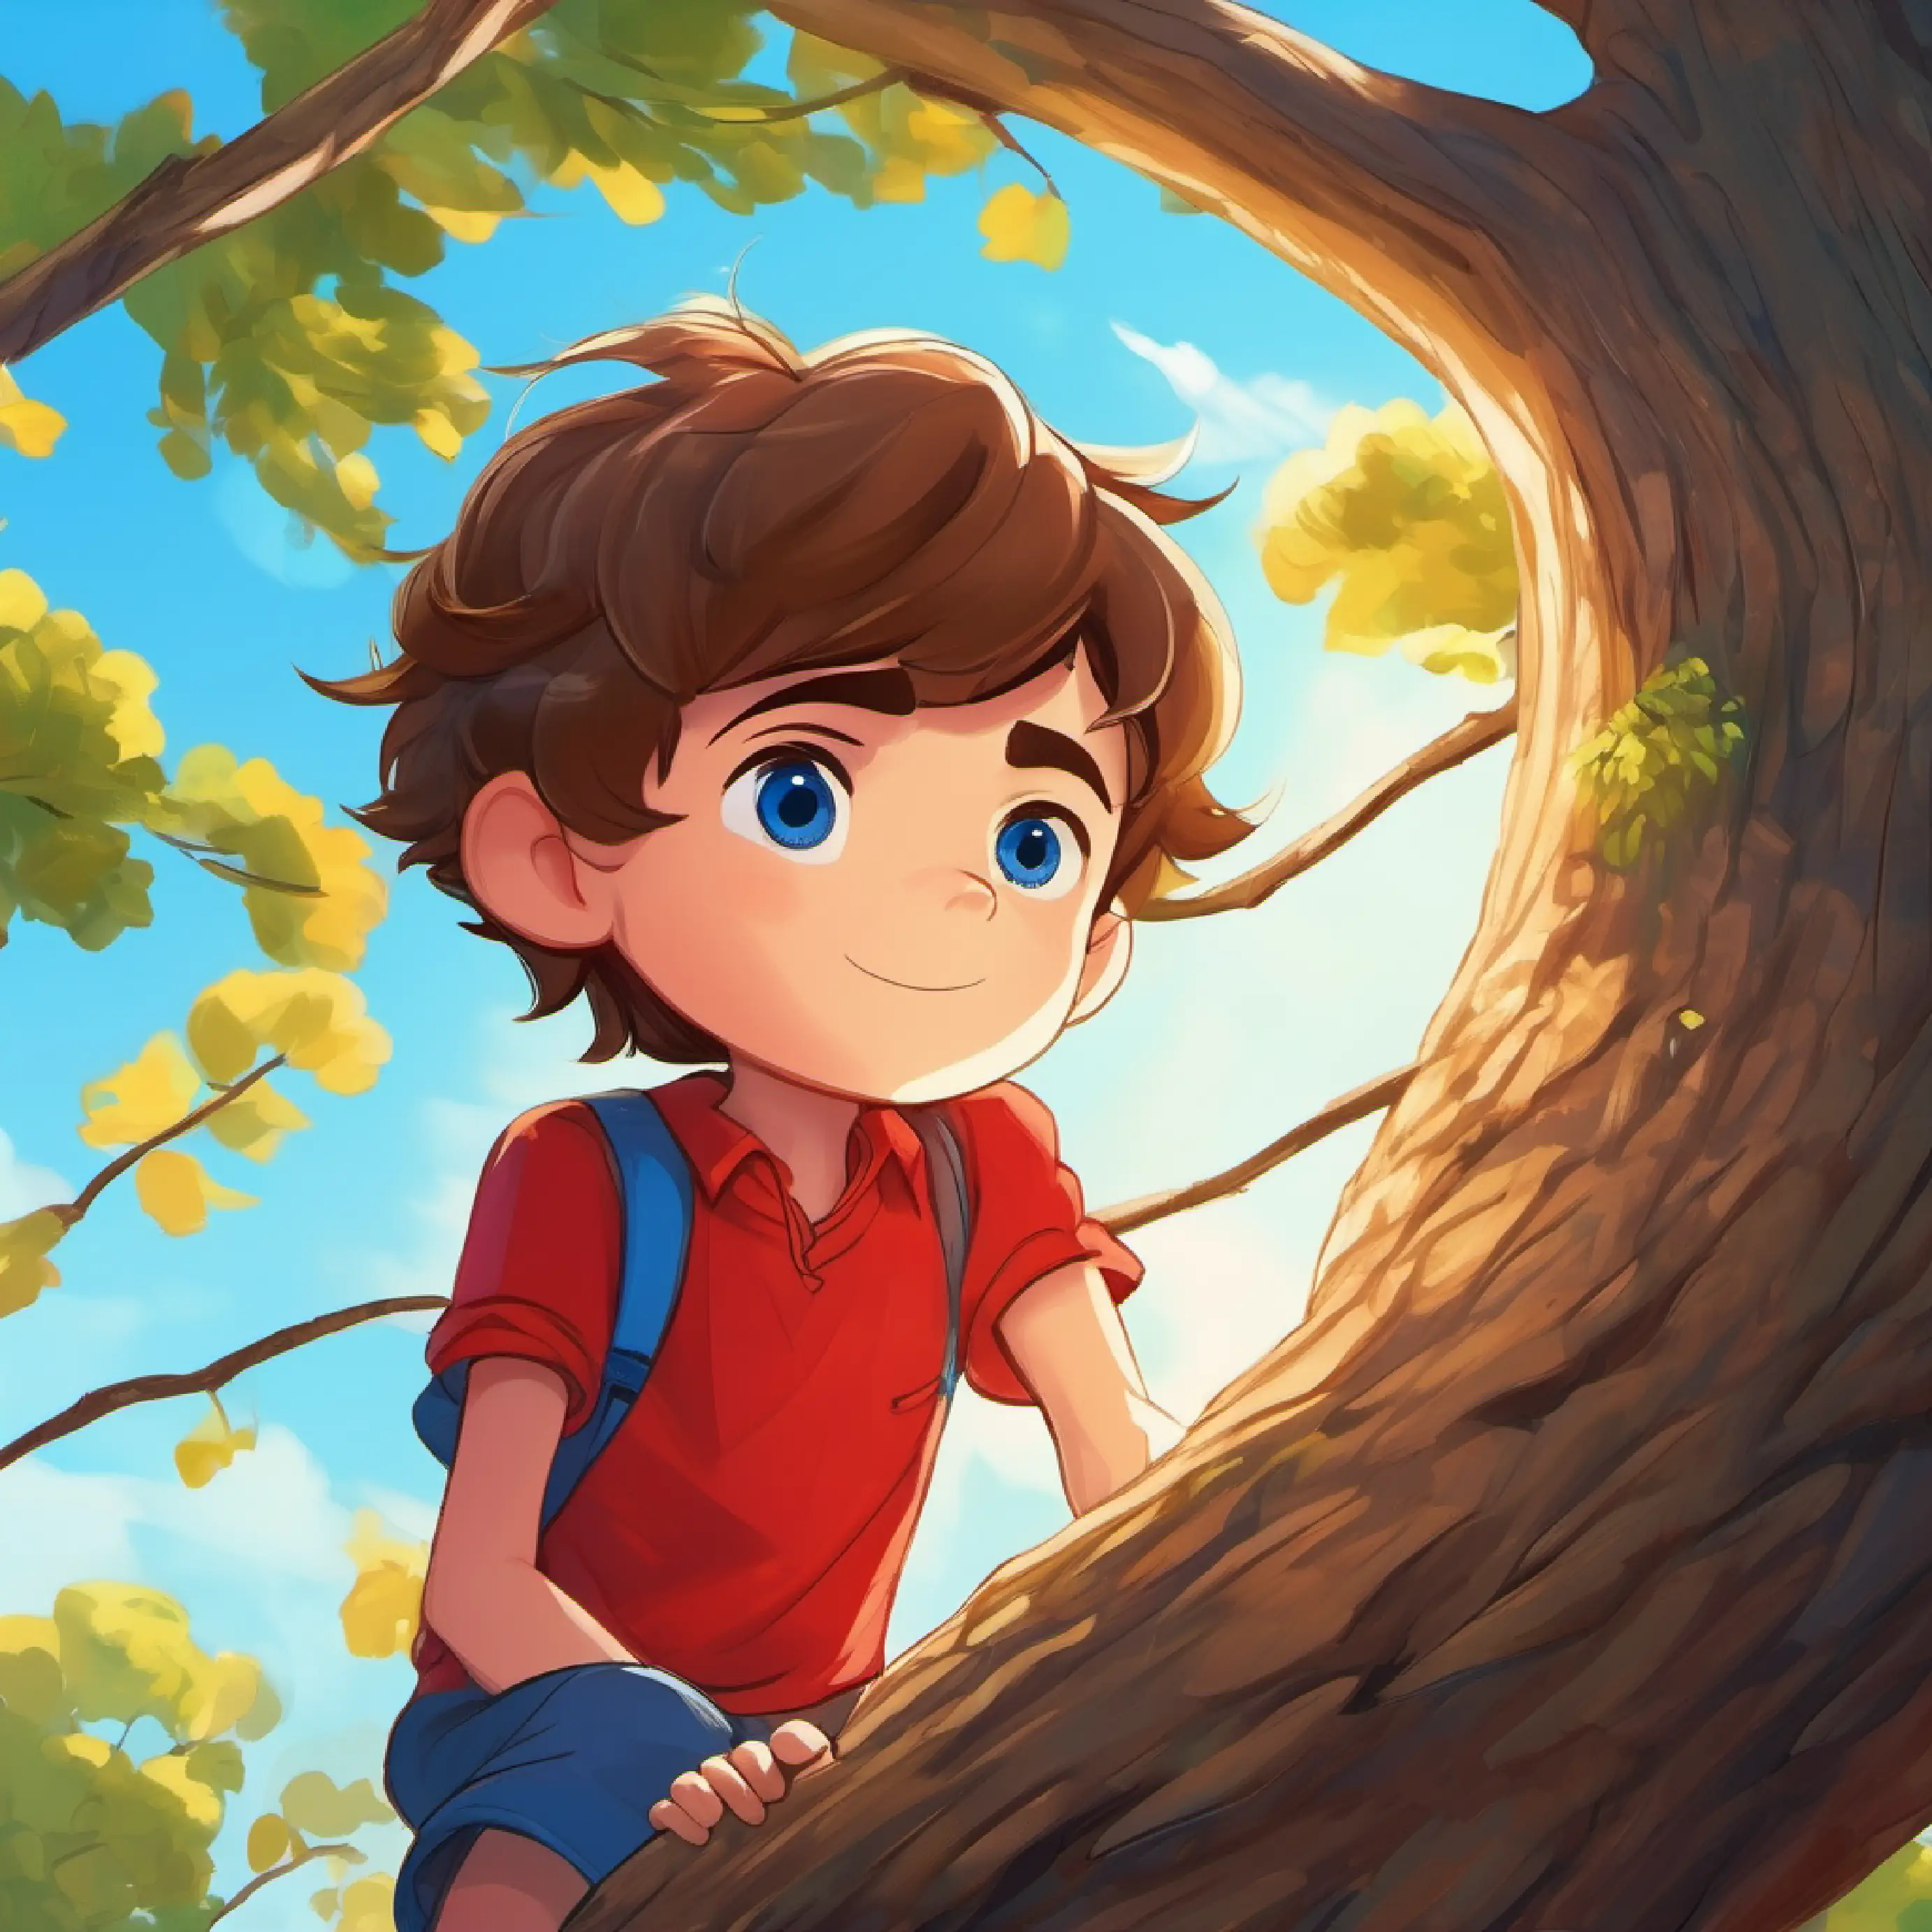 Tree branches seem inviting, Young boy, short brown hair, bright blue eyes, wearing a red shirt decides to wait for recess to climb.